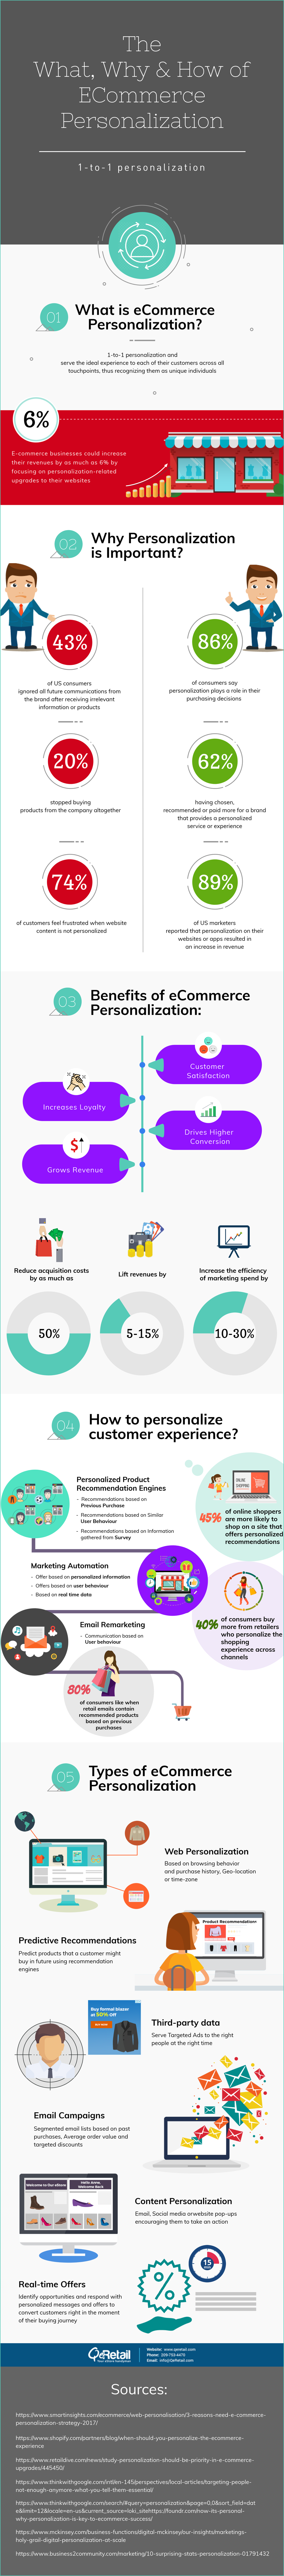 The What, Why & How of E-commerce Personalization